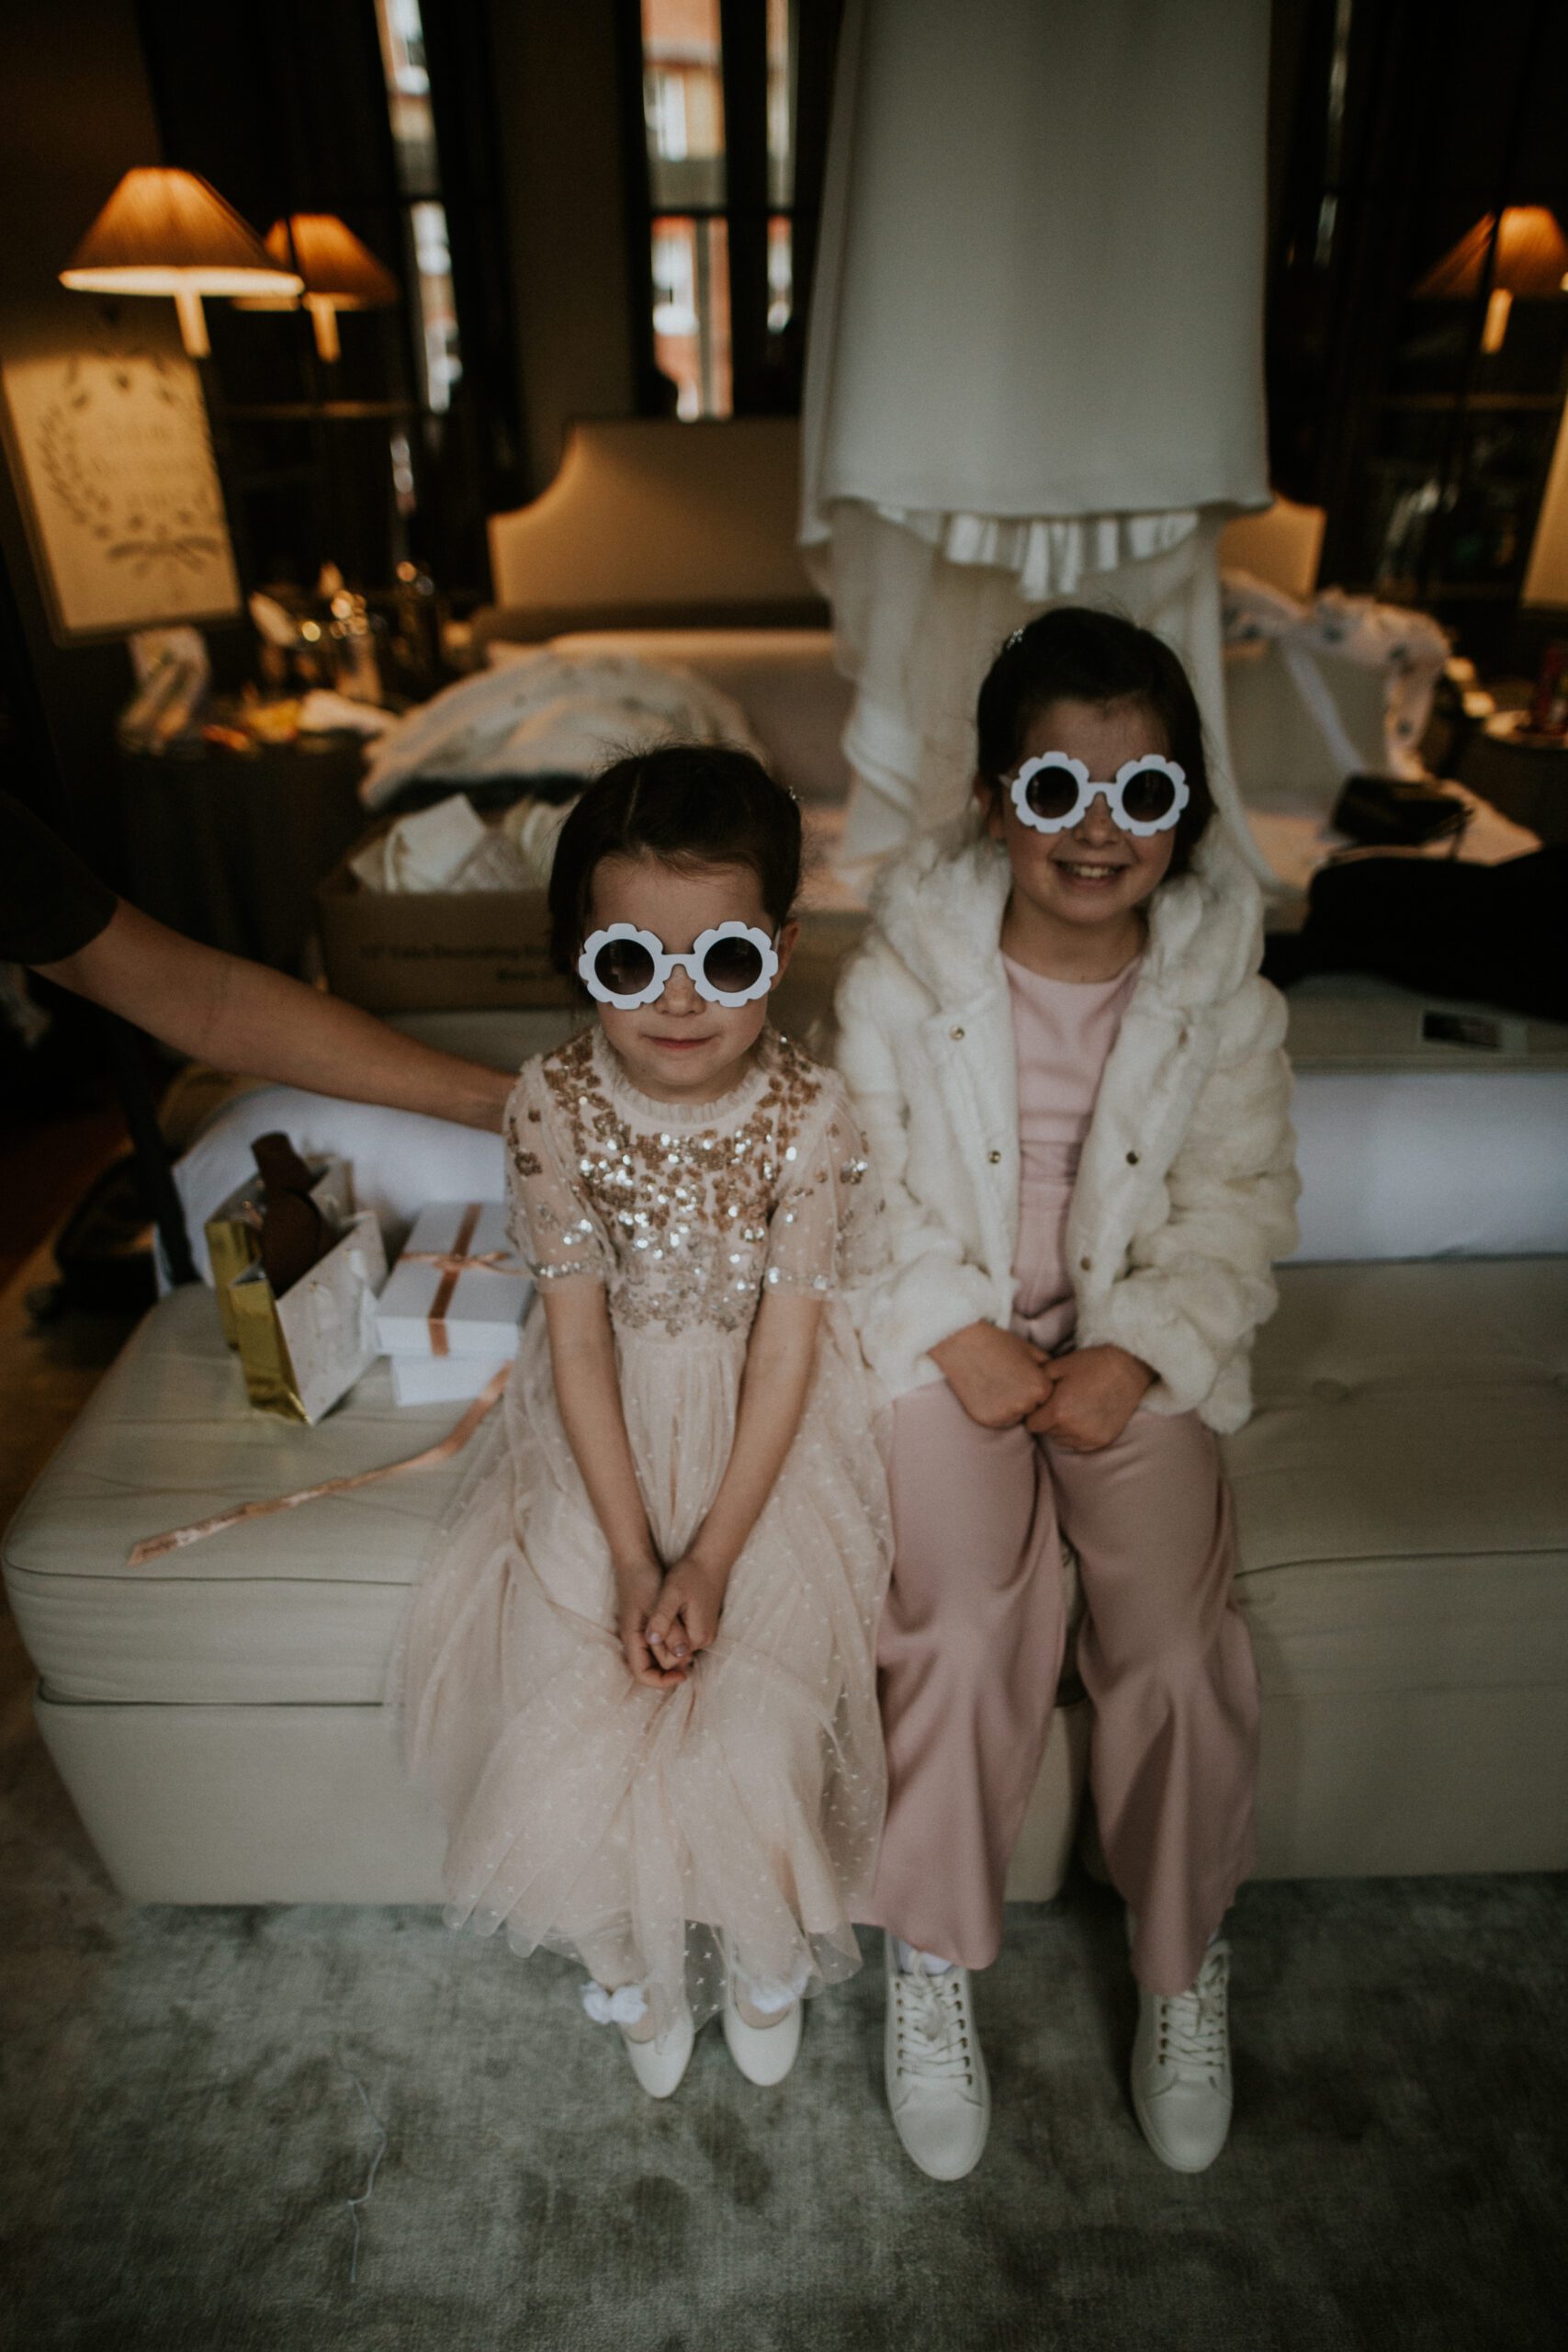 Bridesmaids have fun wearing silly glasses while the bride gets ready for her wedding at The Franklin Hotel